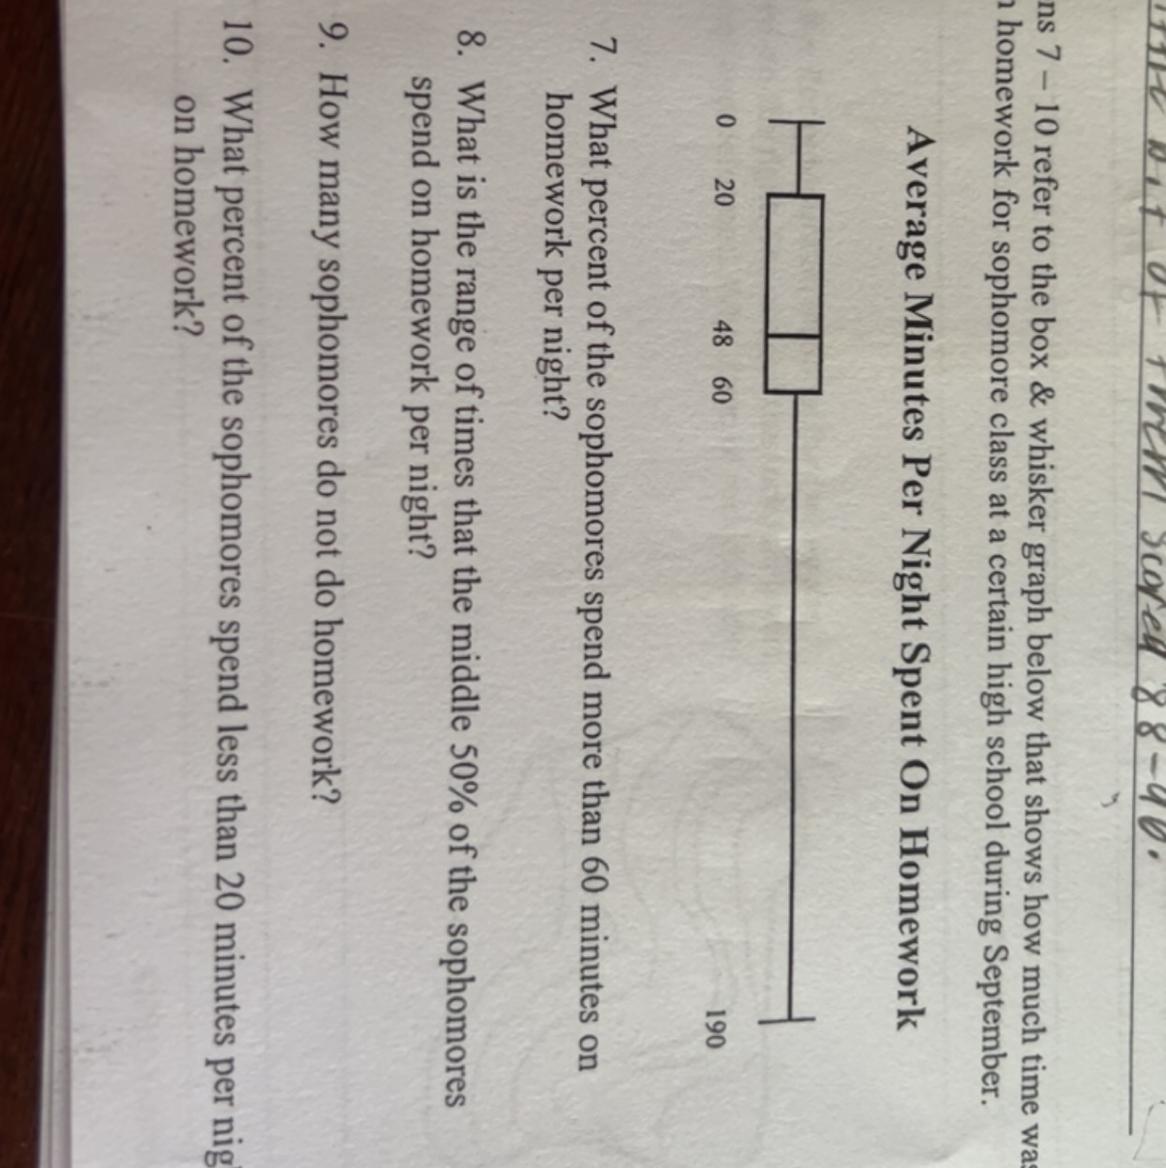 I Need To Know The Answers To Number 7, 8, 9, 10 